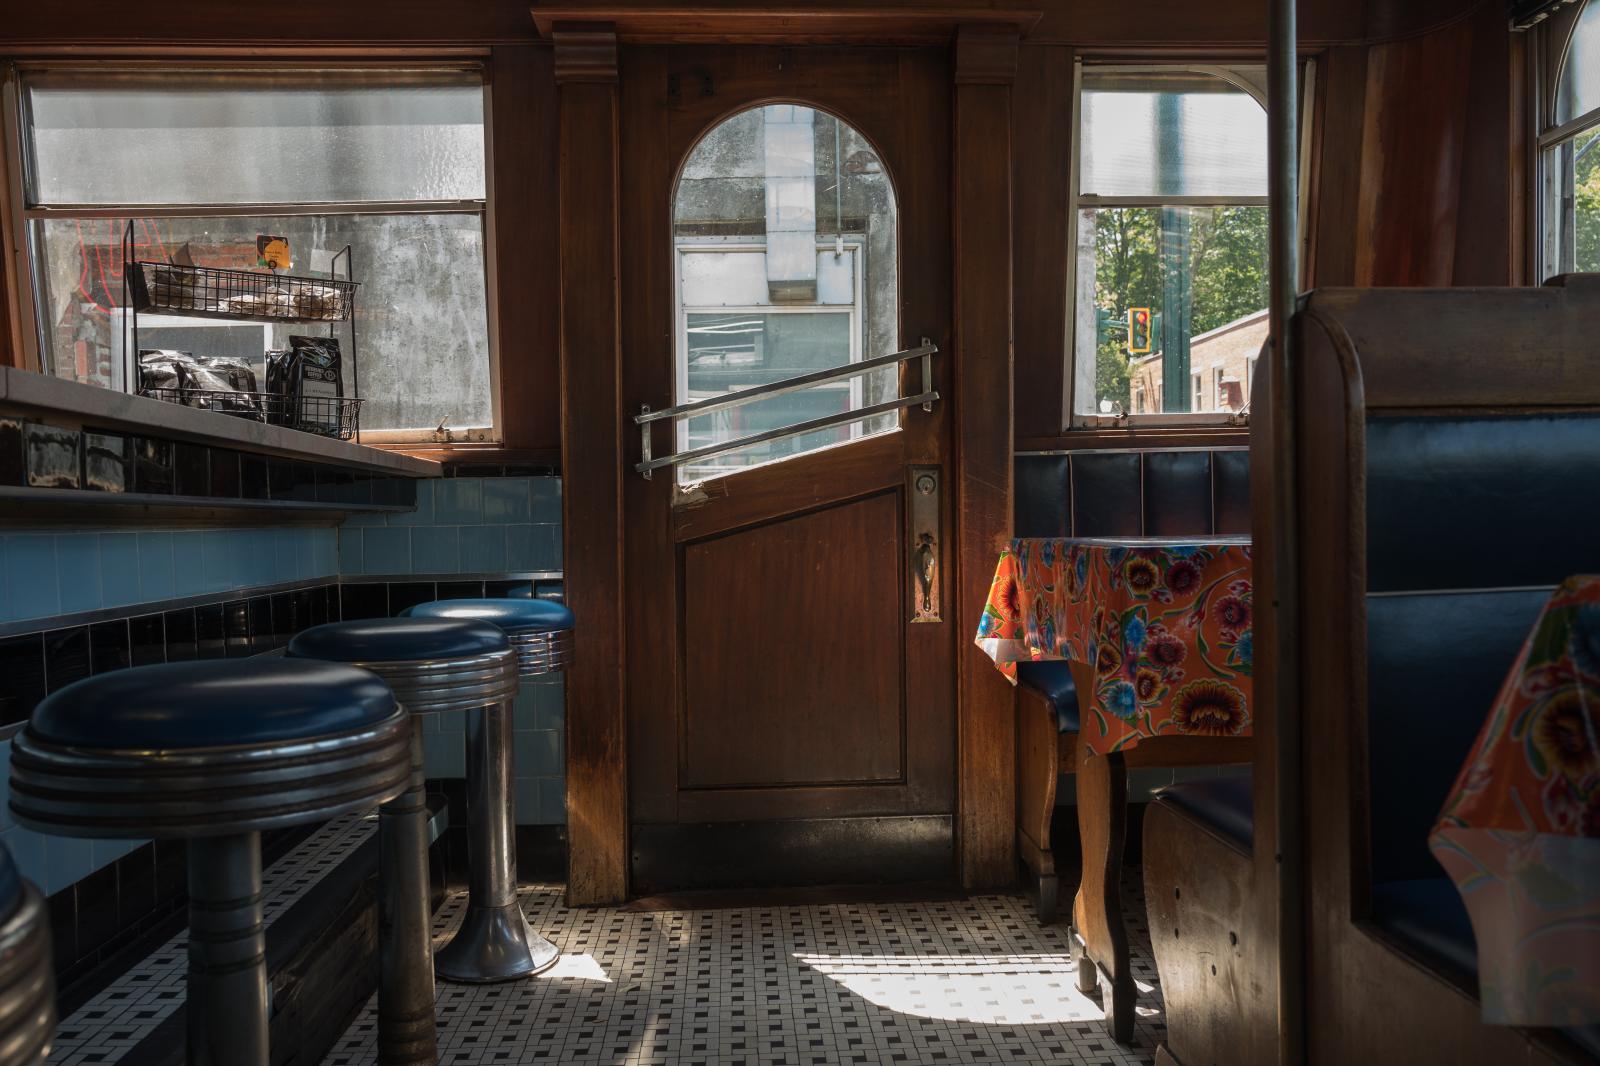 A-1 Diner, Gardiner, Maine, August 2021 | Buy this image